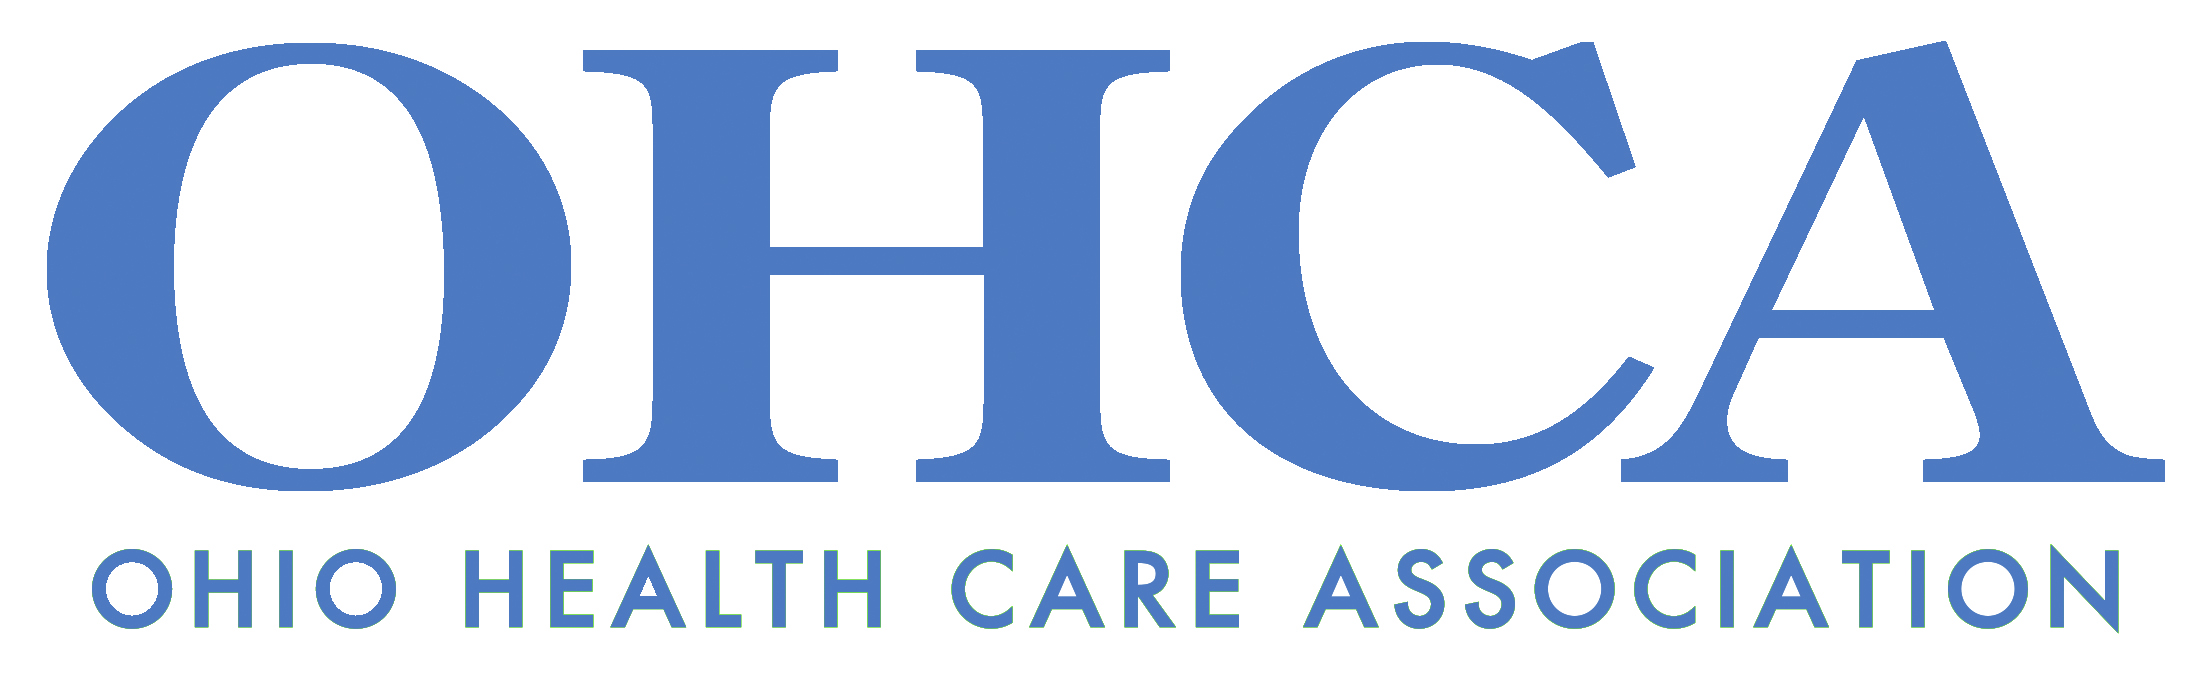 OHCA Webinar: Phase 2 Update & What to Expect for Phase 3